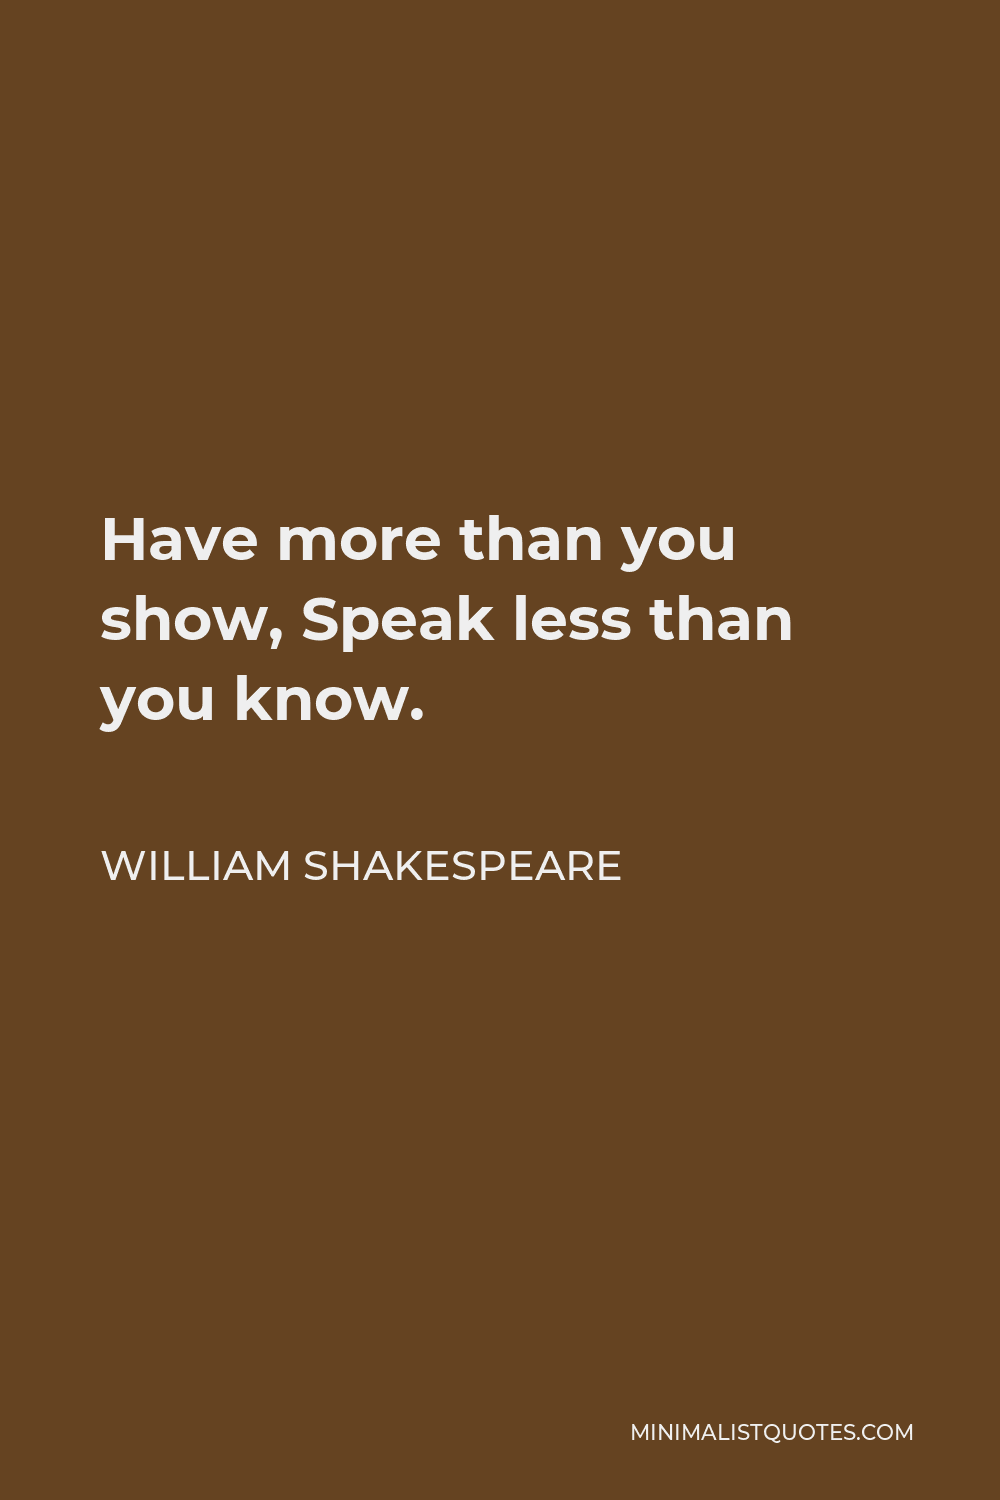 William Shakespeare Quote - Have more than you show, Speak less than you know.